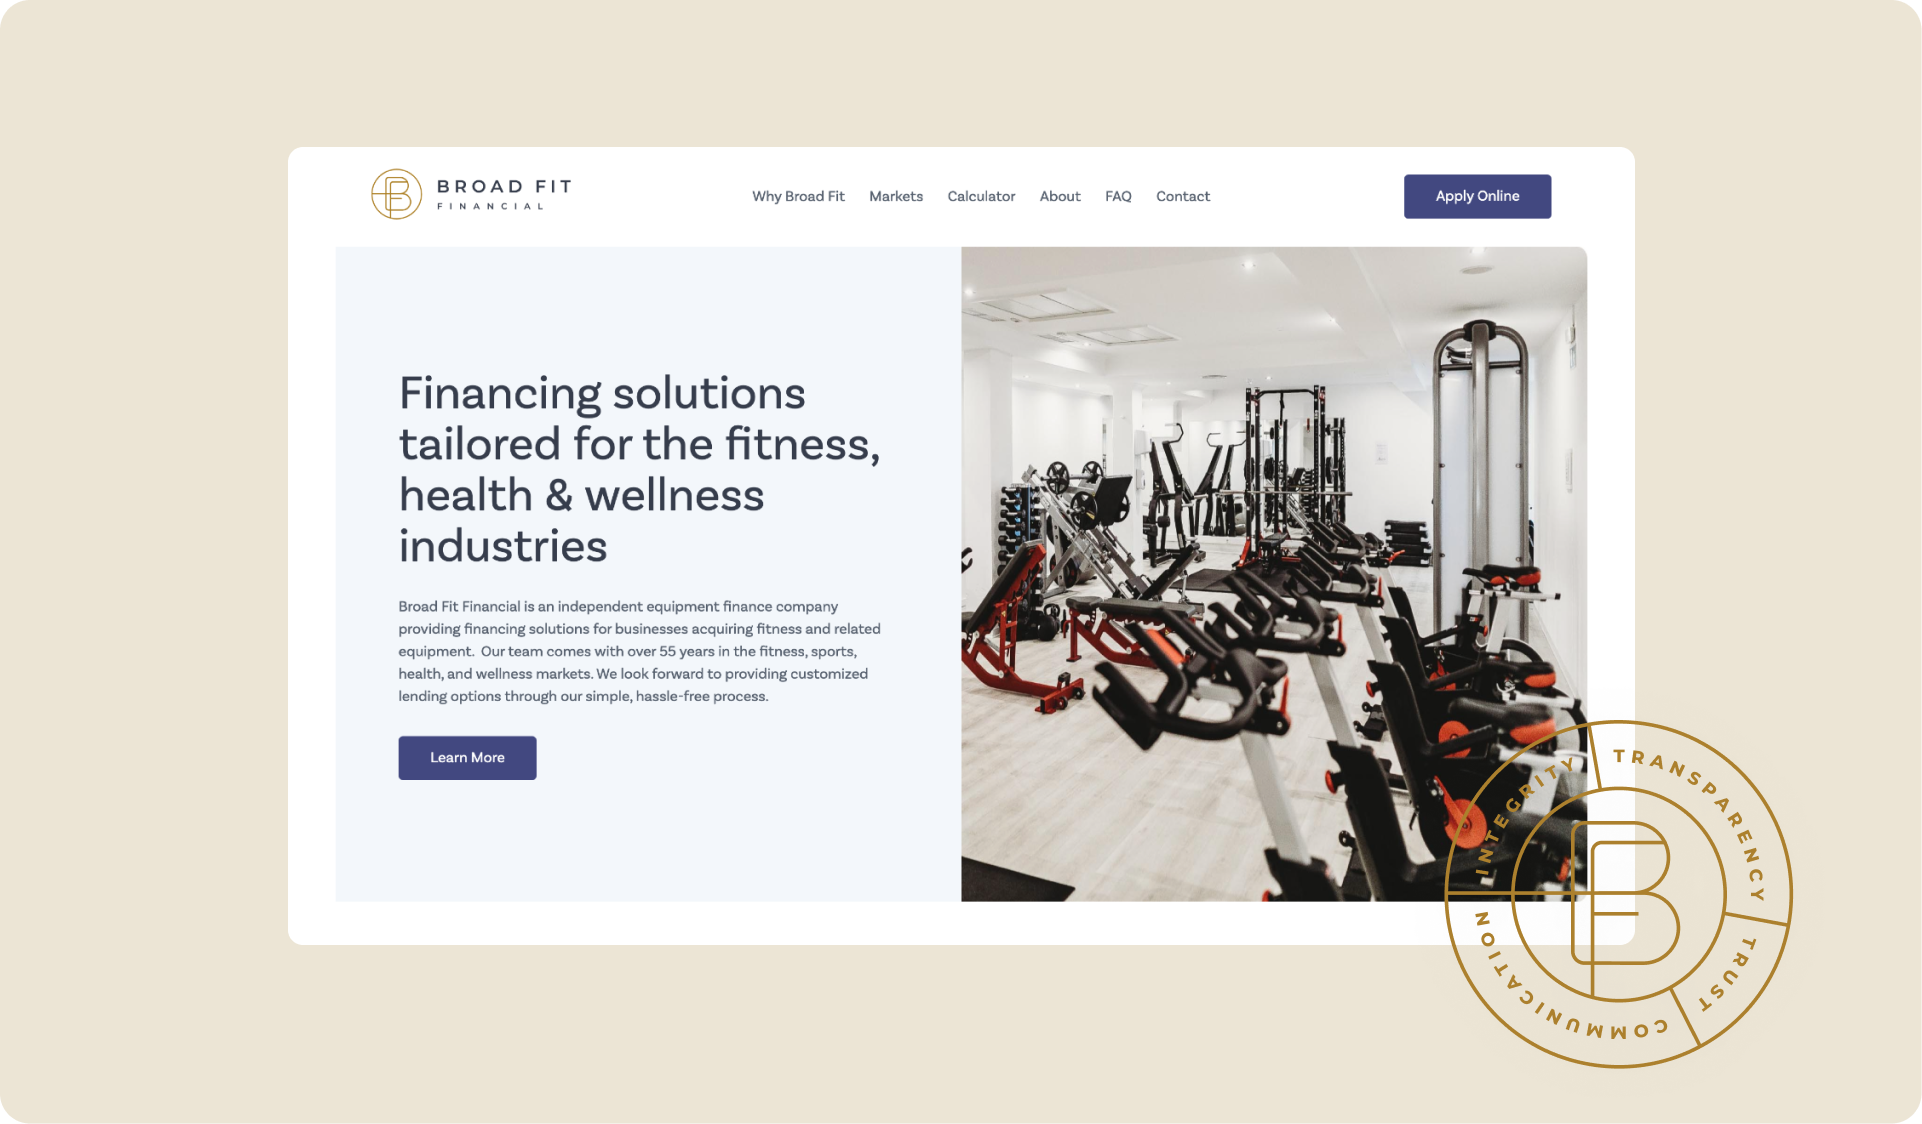 Homepage design showing a top header with a short text about the company and an image of sports equipment.